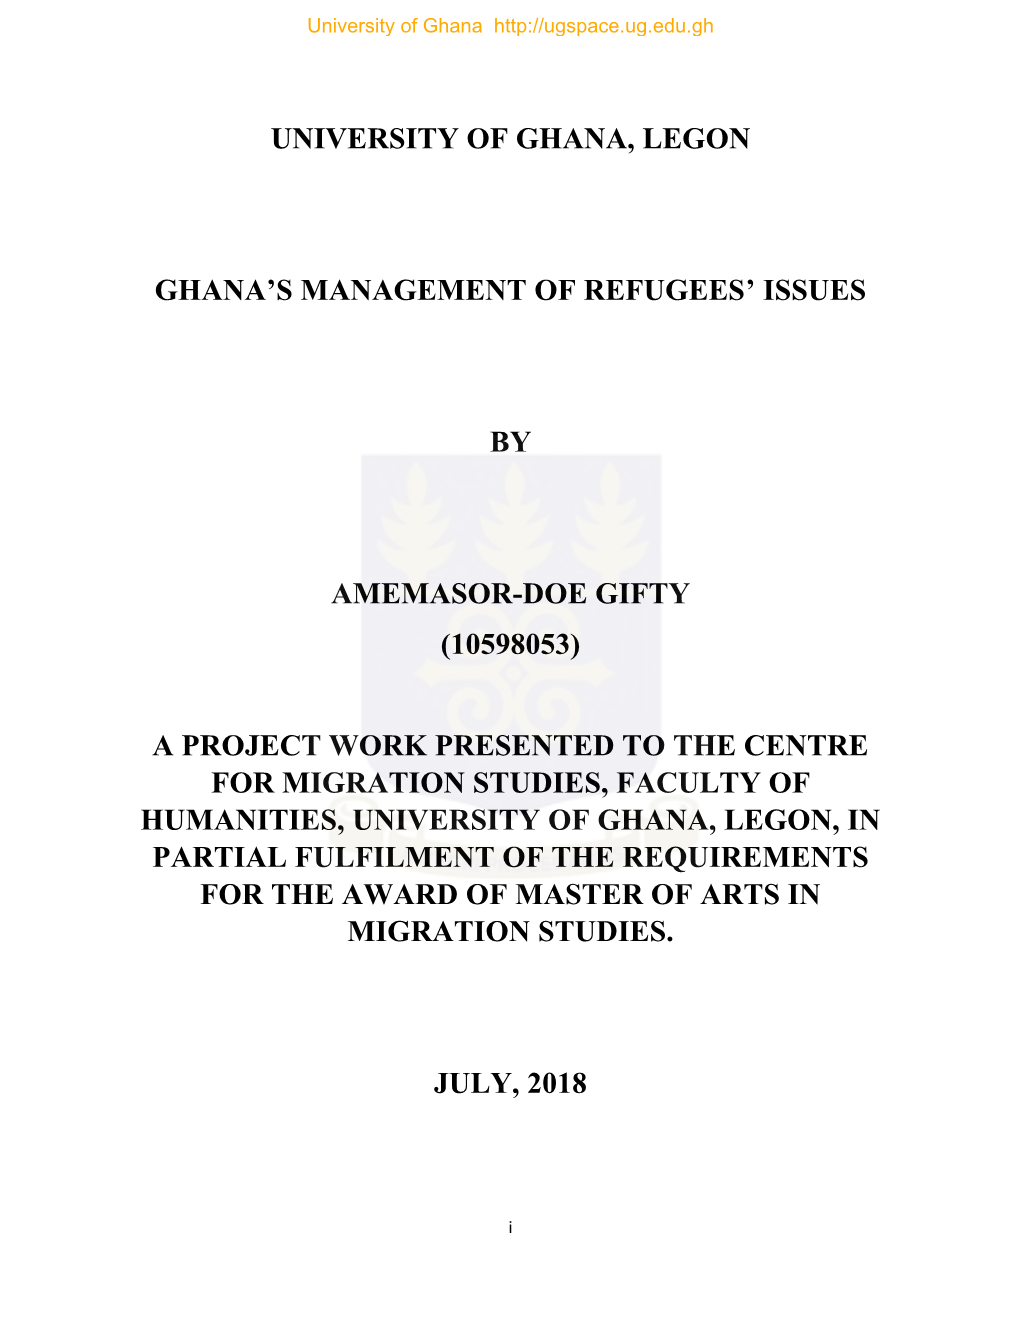 Ghana's Management of Refugees' Issues.Pdf